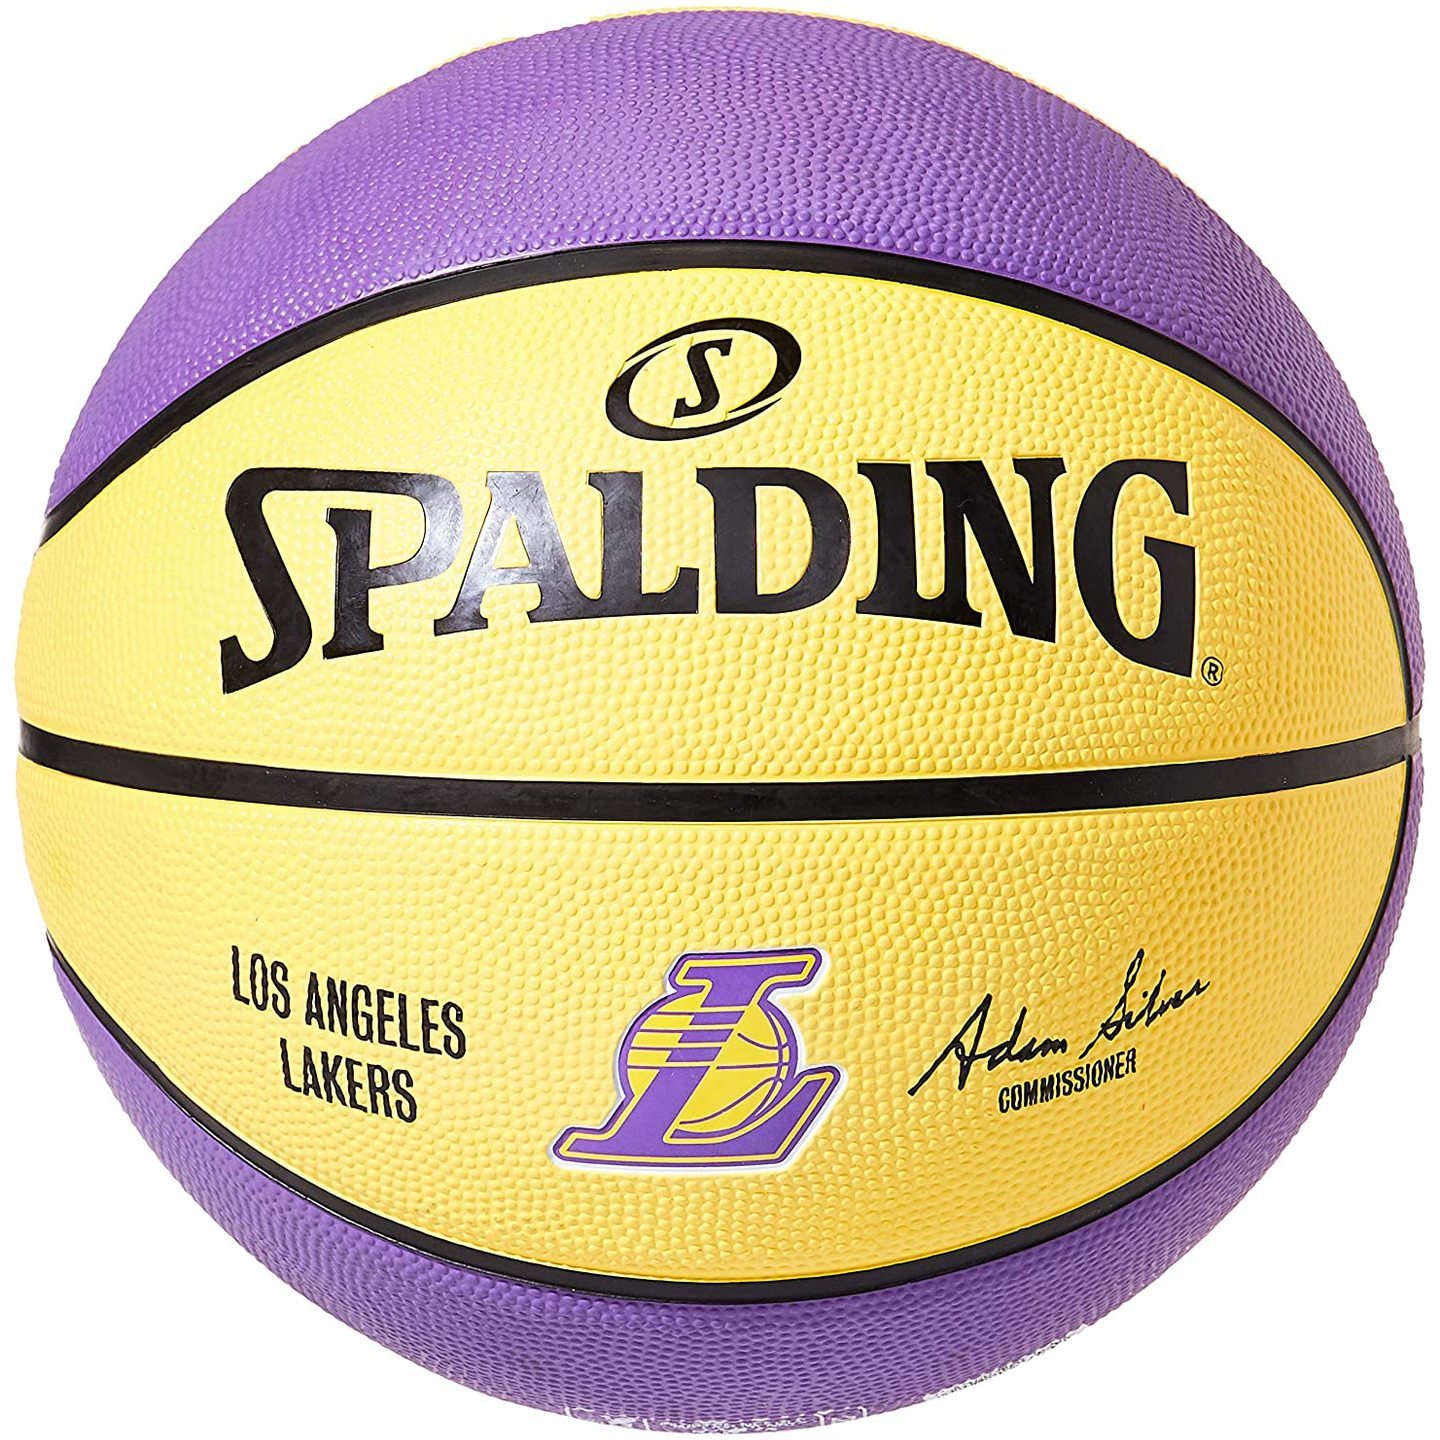 SPALDING LOS ANGELES LAKERS BASKETBALL SIZE 7